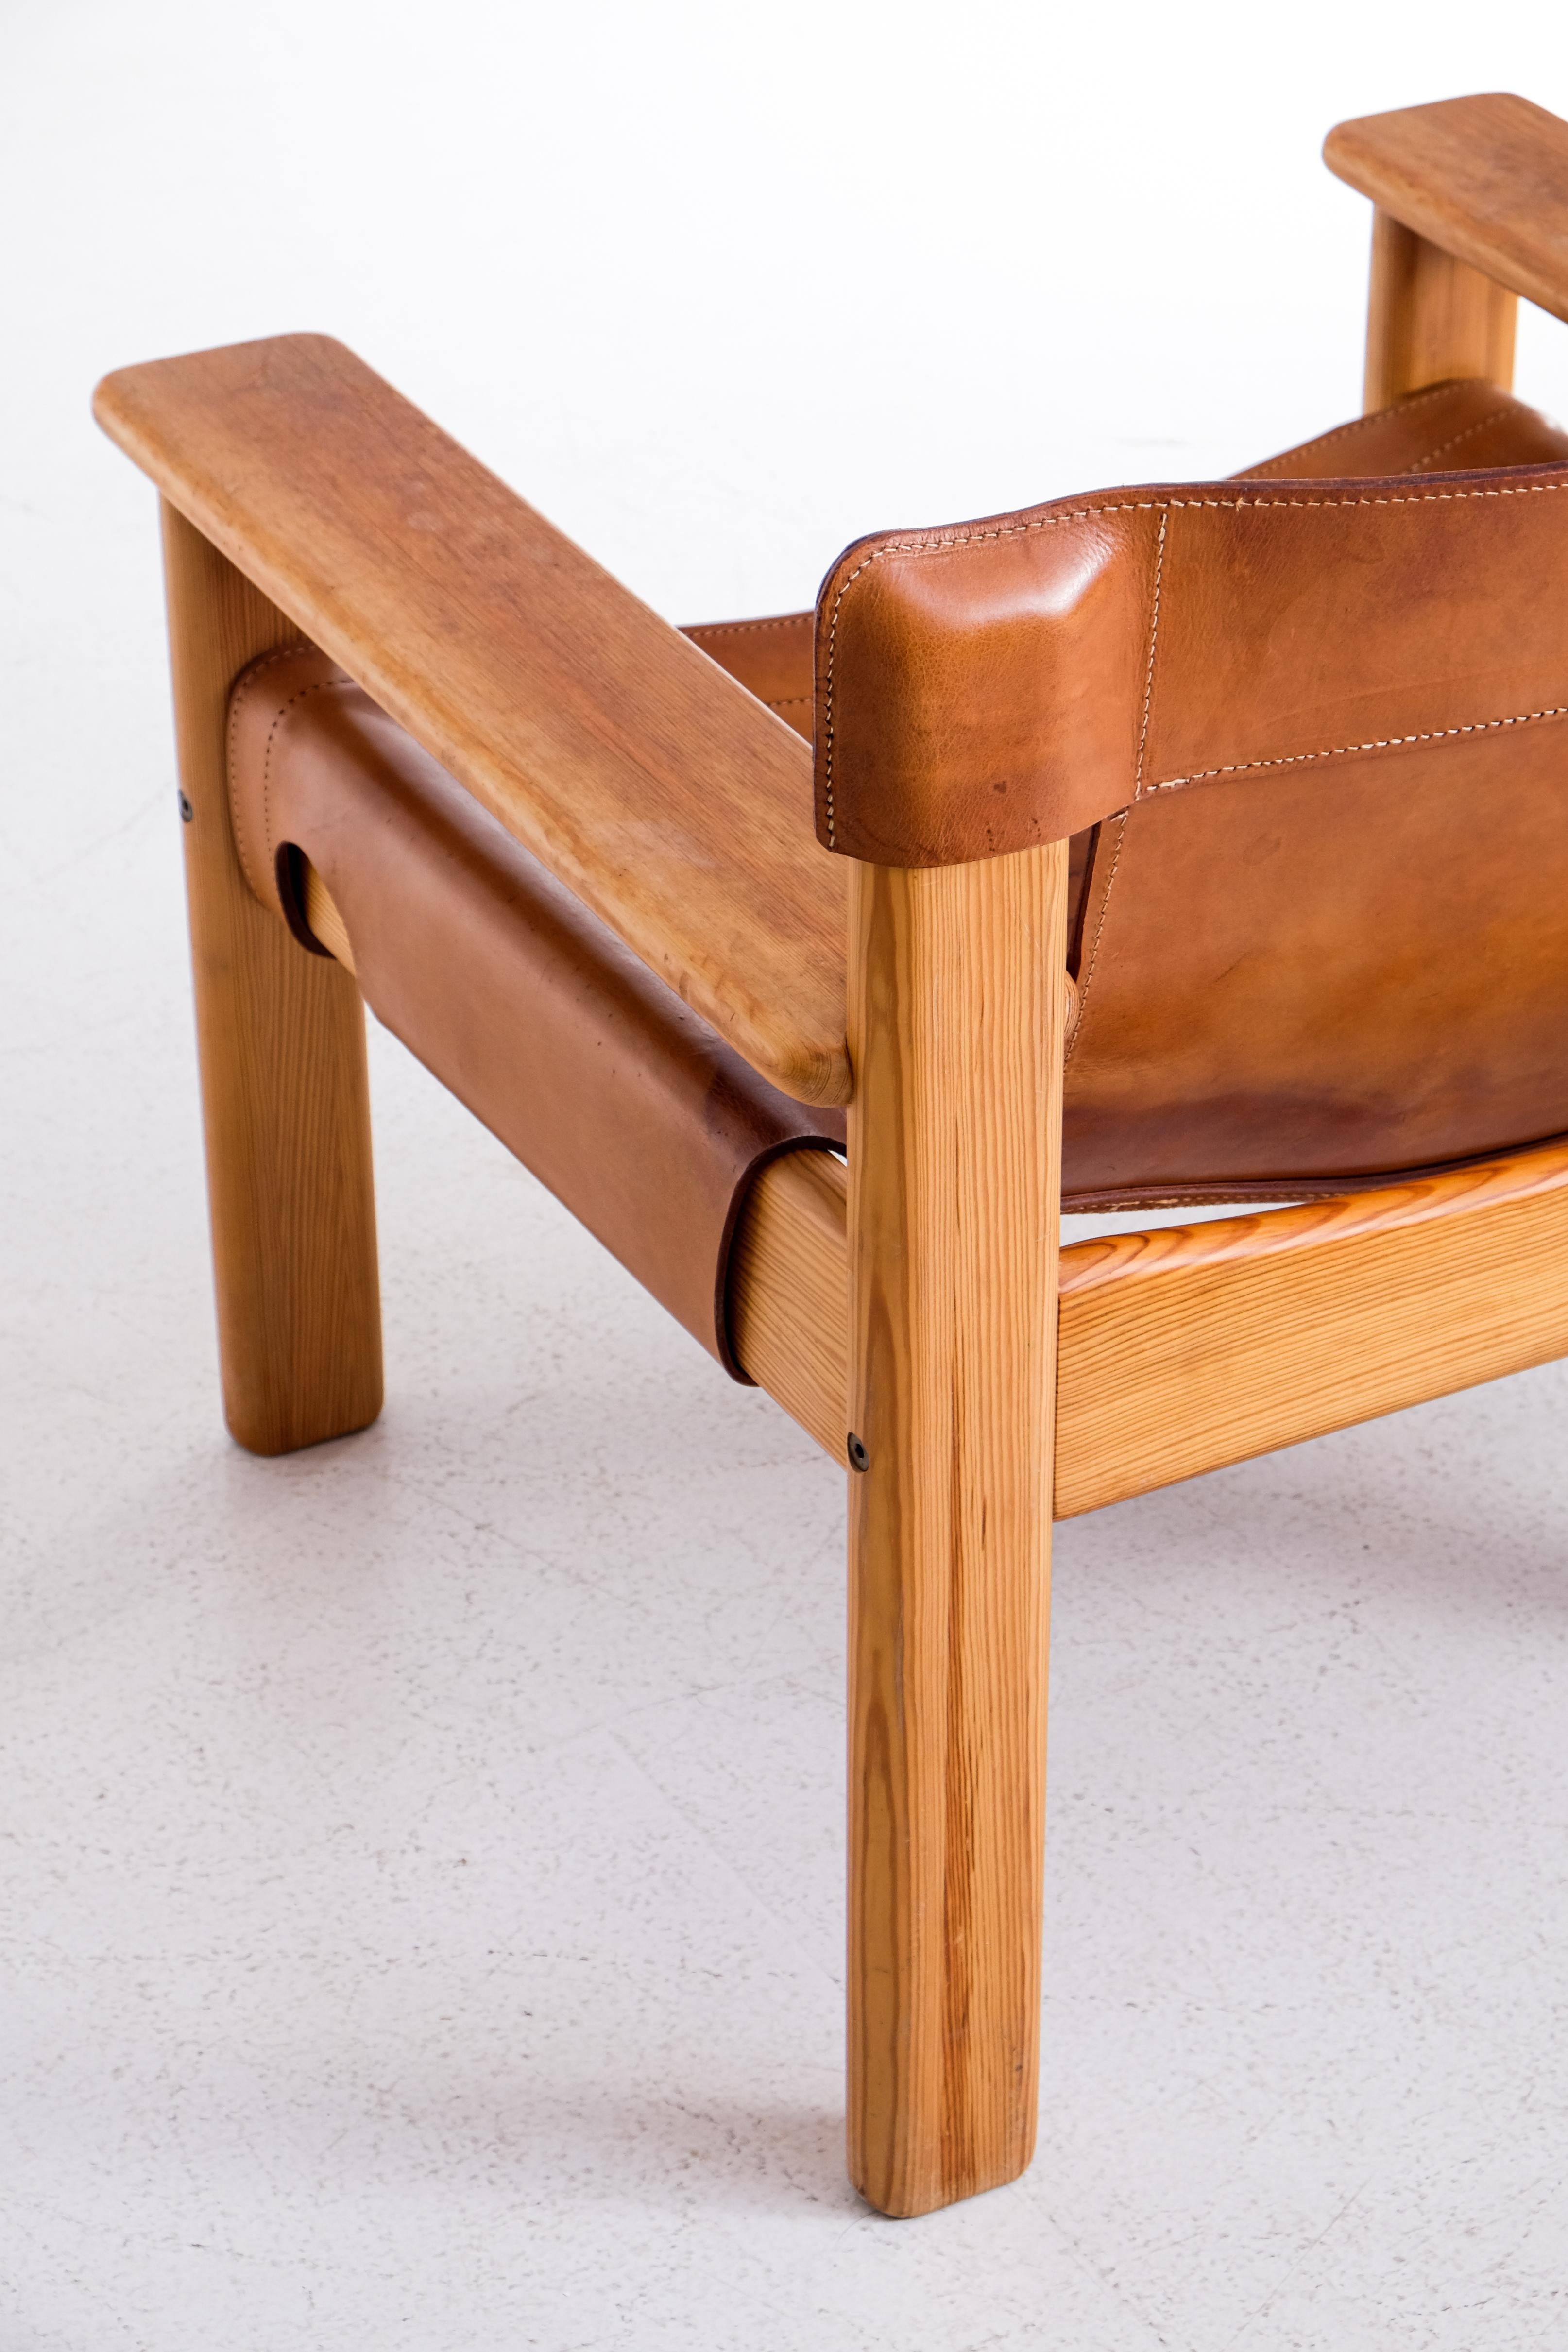 Leather Karin Mobring 'Natura' Easy Chair, Sweden, 1970s For Sale